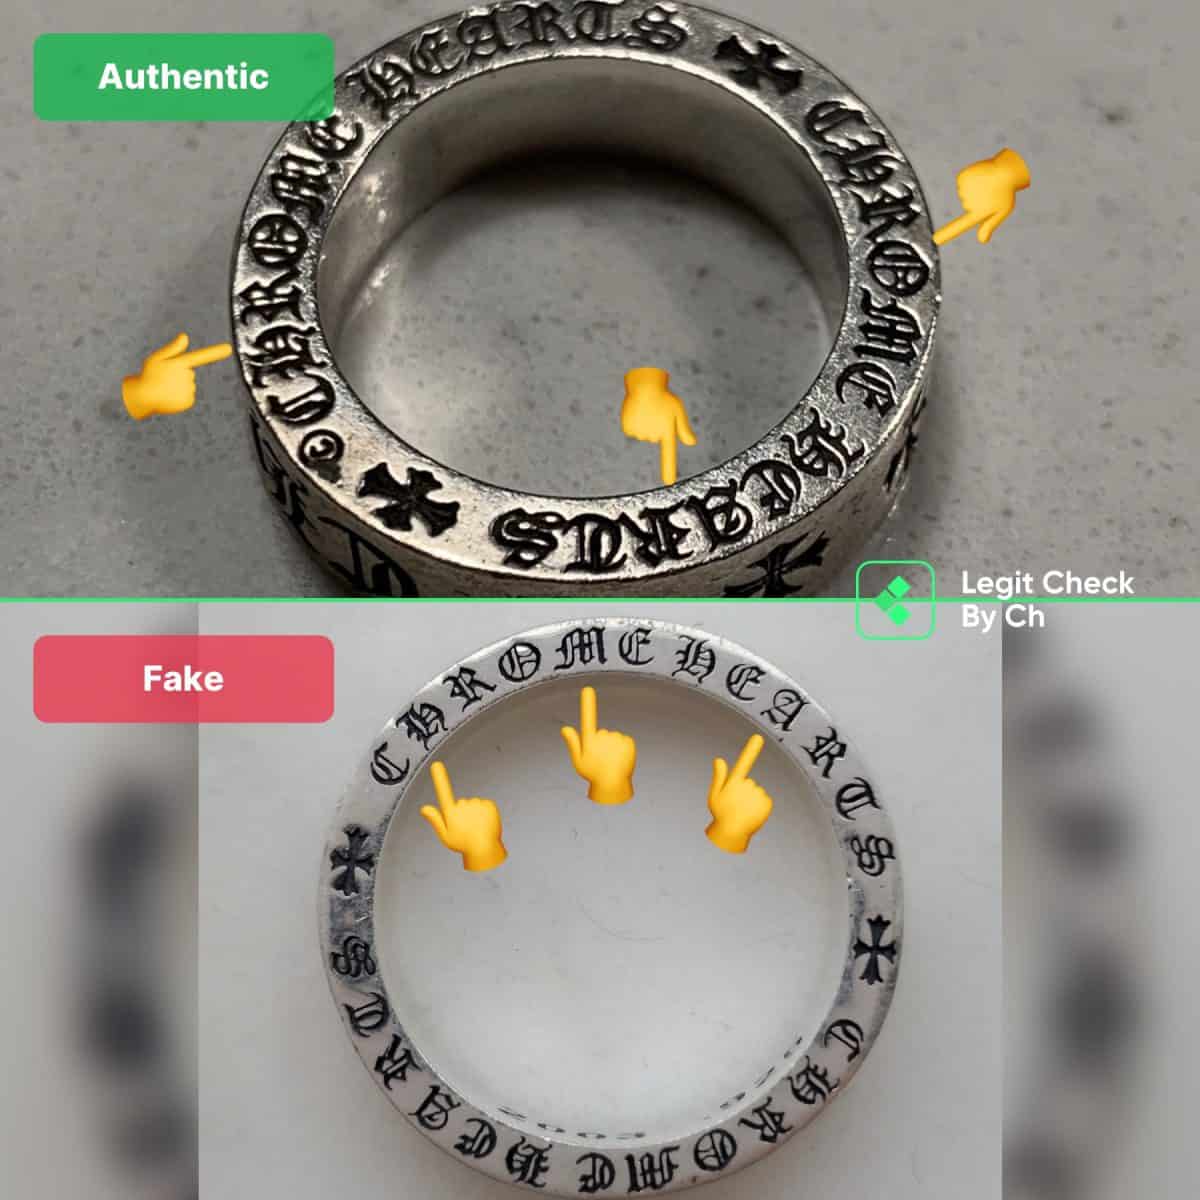 chrome hearts ring real vs fake guide